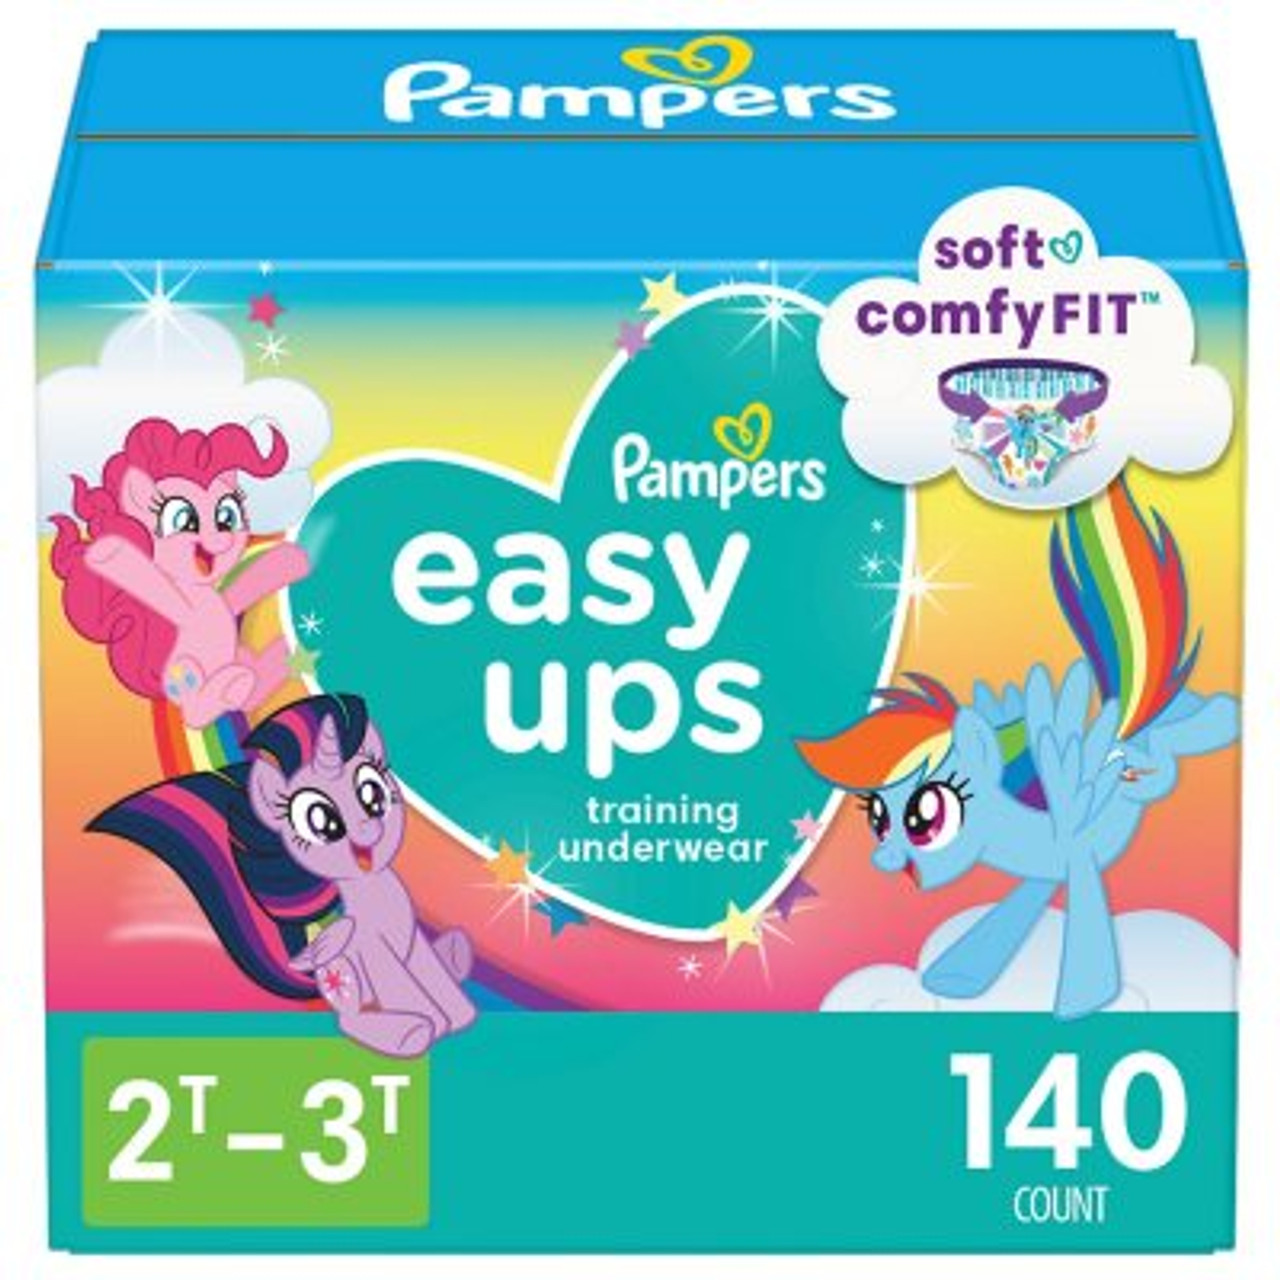 Pampers Easy Ups Training Pants Underwear for Girls 2T-3T - 140 ct. (16-34 lbs.) - *Pre-Order